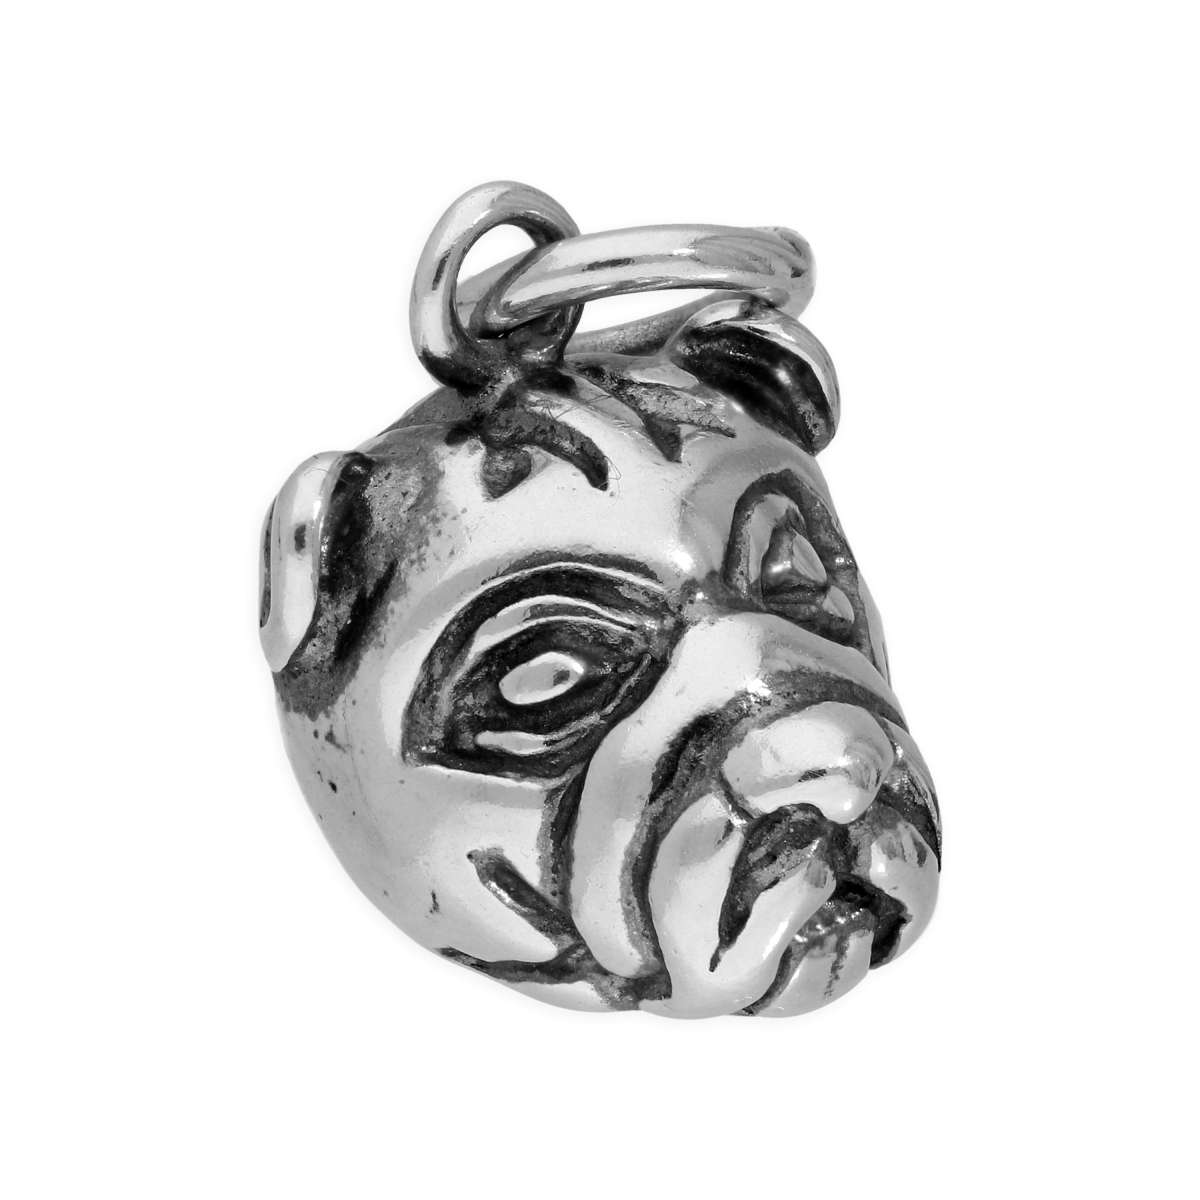 Wholesaler Of Fine Sterling Silver Charm Suppliers |Manufacturer 3D Bulldog Head Charm|